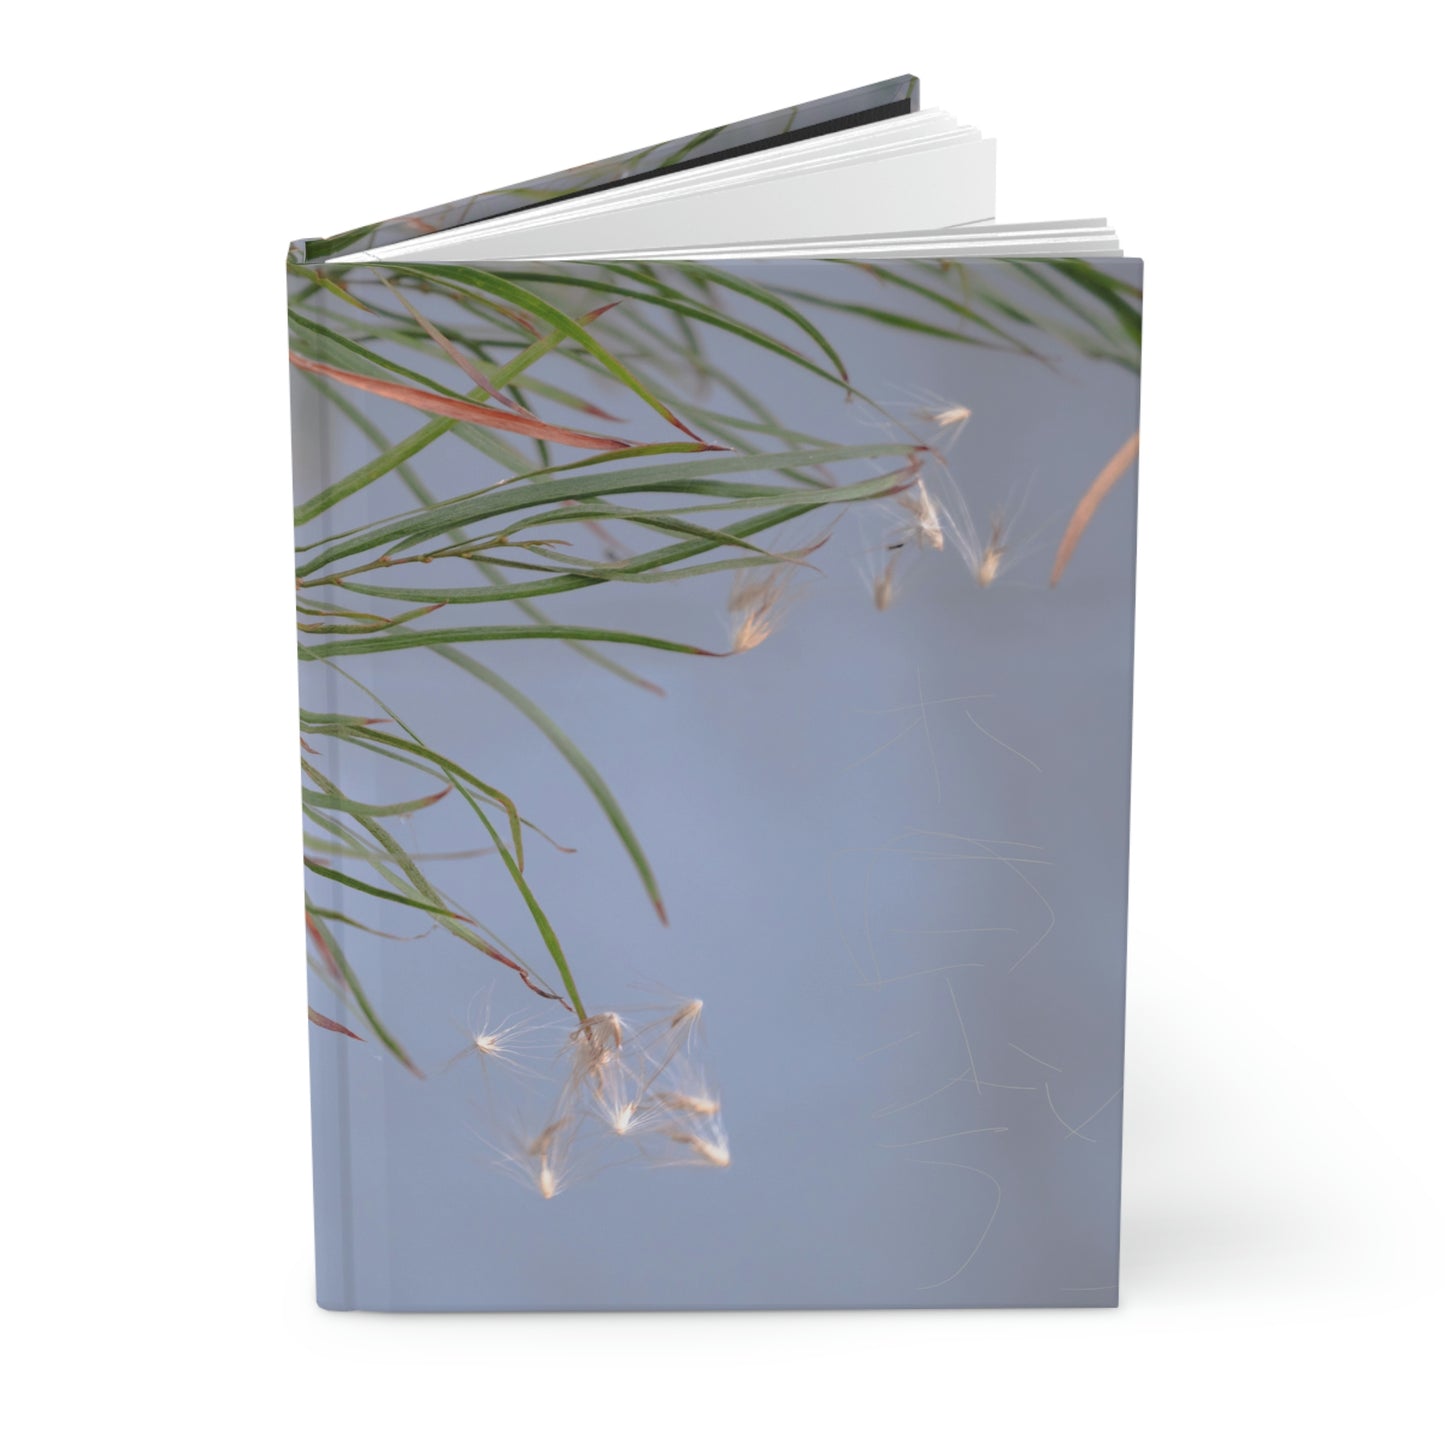 Buds against the wall hardcover journal diary notebook gift ideas